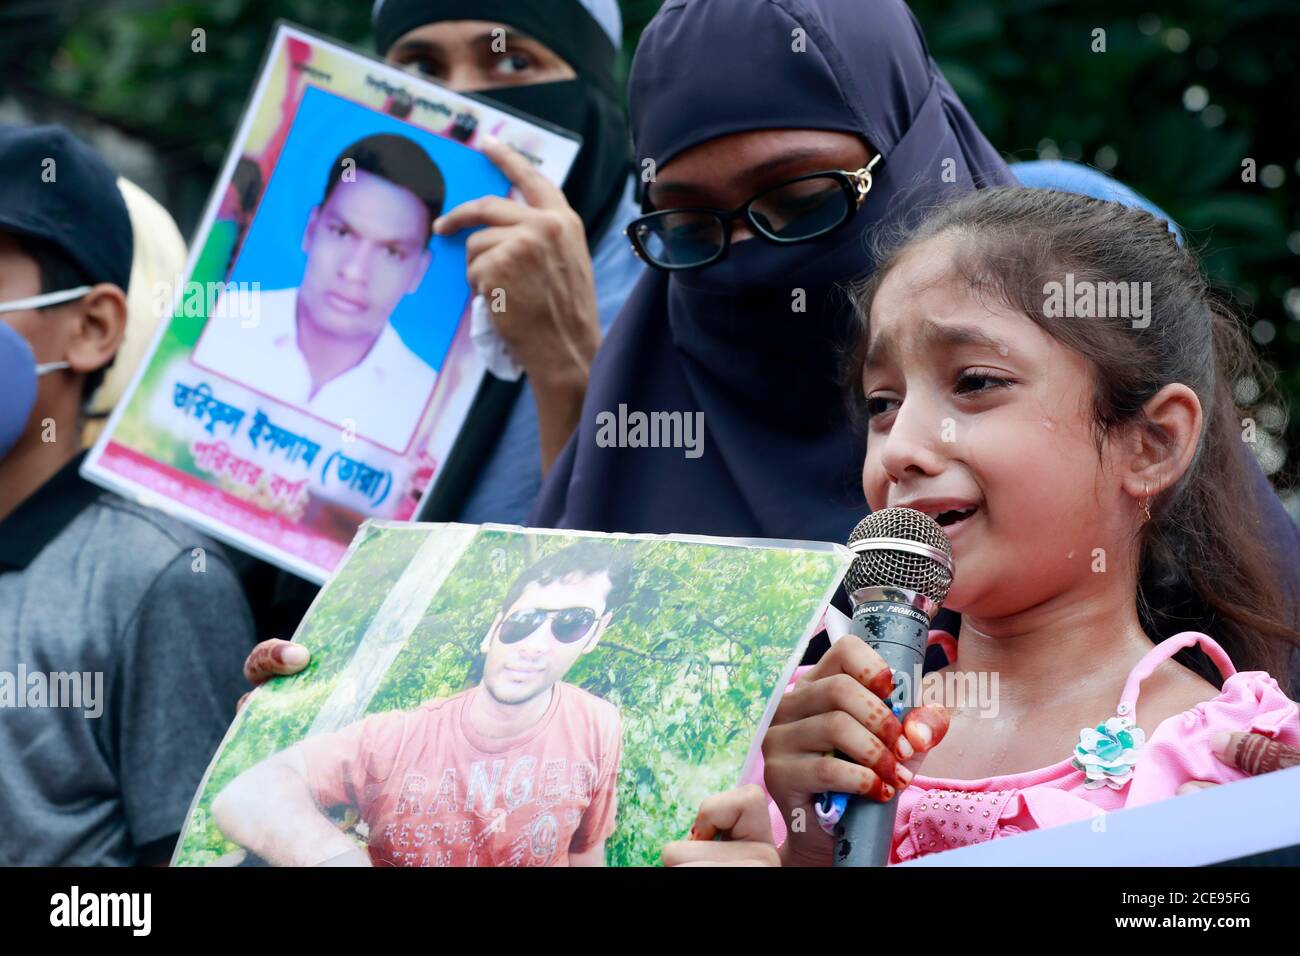 Dhaka, Bangladesh - August 29, 2020: Little Hridy speaks as tears roll down her cheeks. She was speaking at a programmed organized by Mother’s Call in Stock Photo